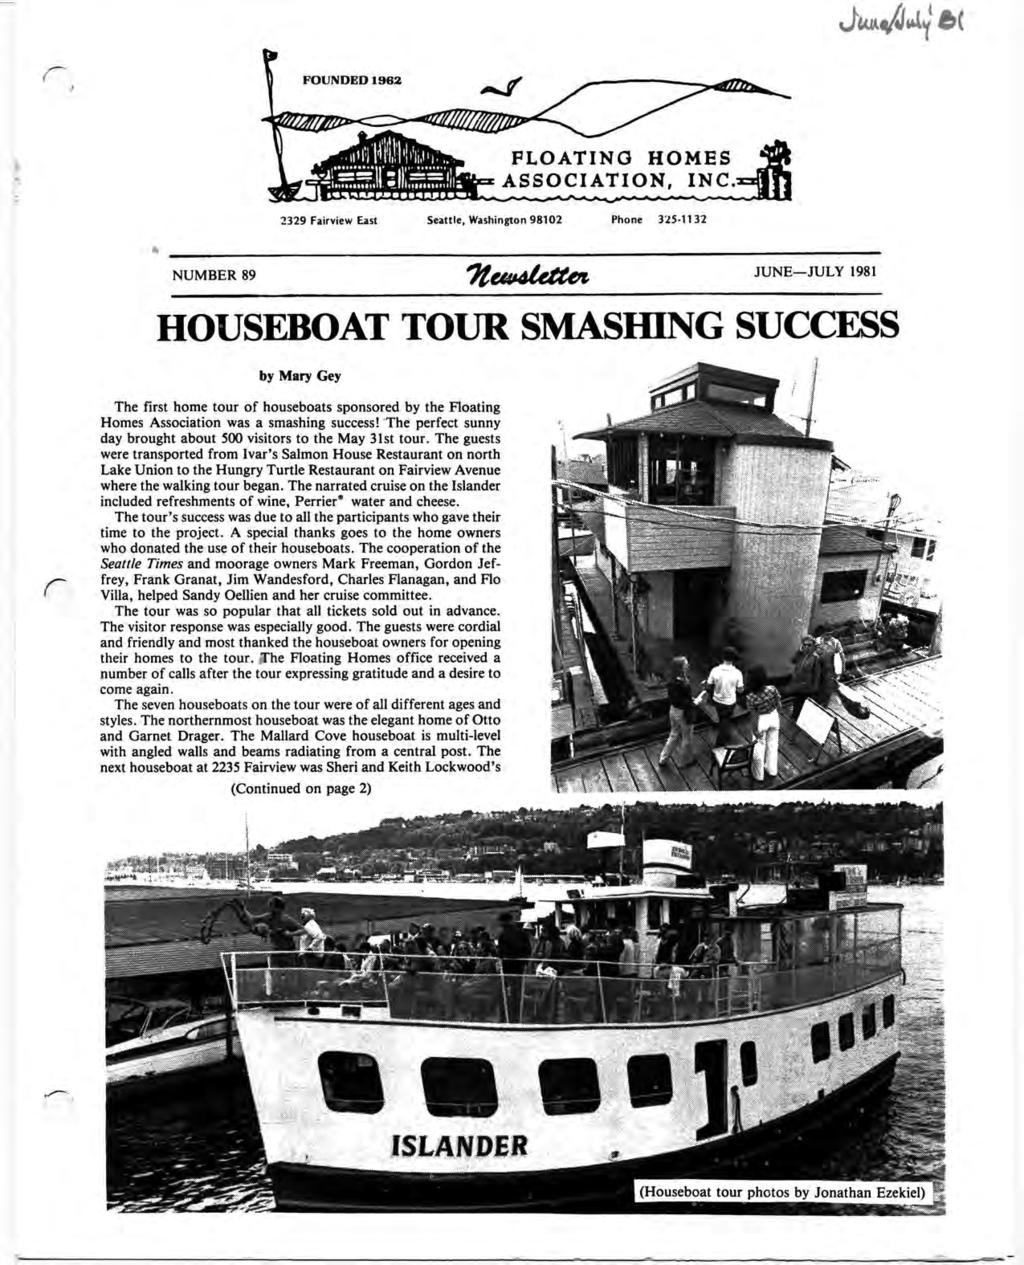 FOUNDED 1962 FLOATING HOMES ASSOCIATION, INC 2329 Farvew East Seattle, Washngton 98102 Phone 325-1132 NUMBER 89 JUNE-JULY 1981 HOUSEBOAT TOUR SMASIDNG SUCCESS by Mary Gey The frst home tour of